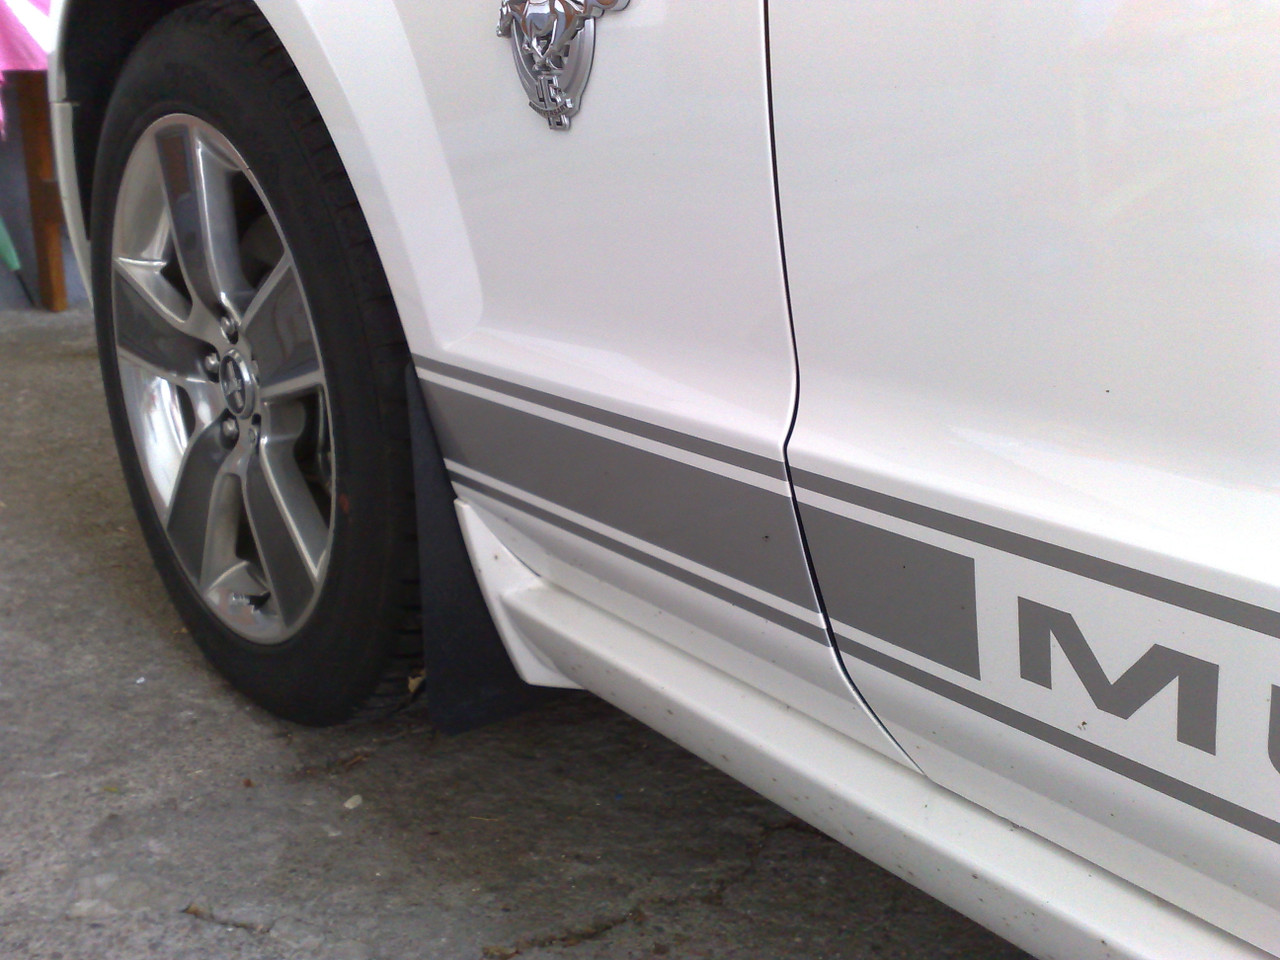 Mustang Front Mud Flaps, Splash Guards for all 2005-2009 Mustang models.